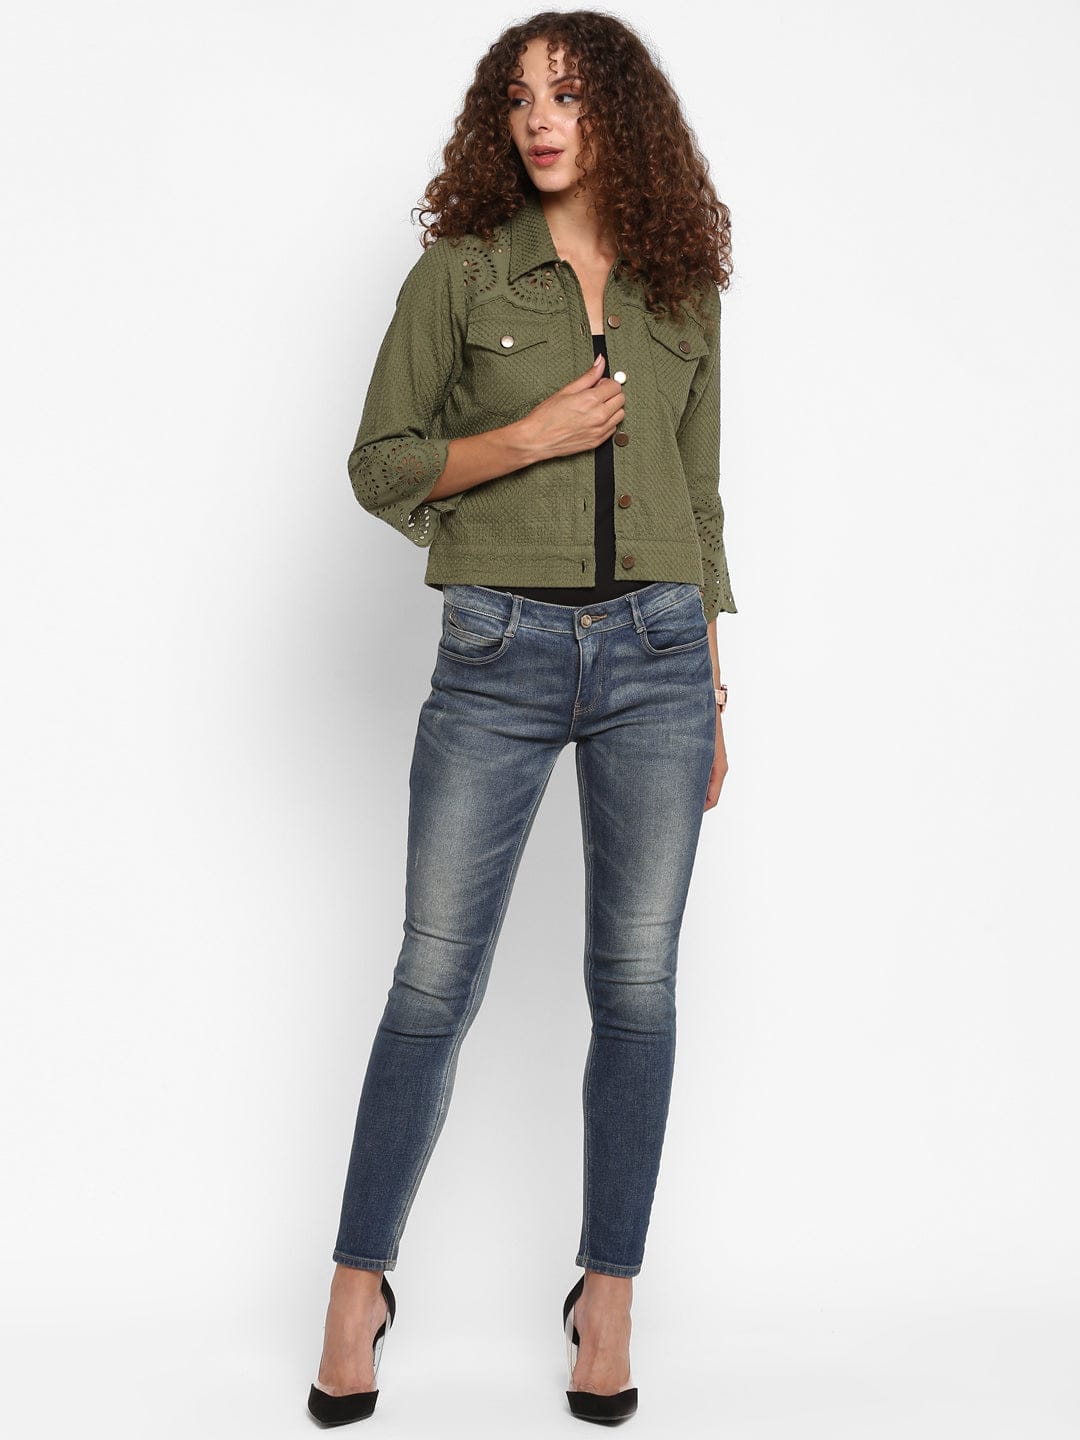 Love the olive pants and jean jacket combo | Olive green jeans, Fashion,  Olive pants outfit